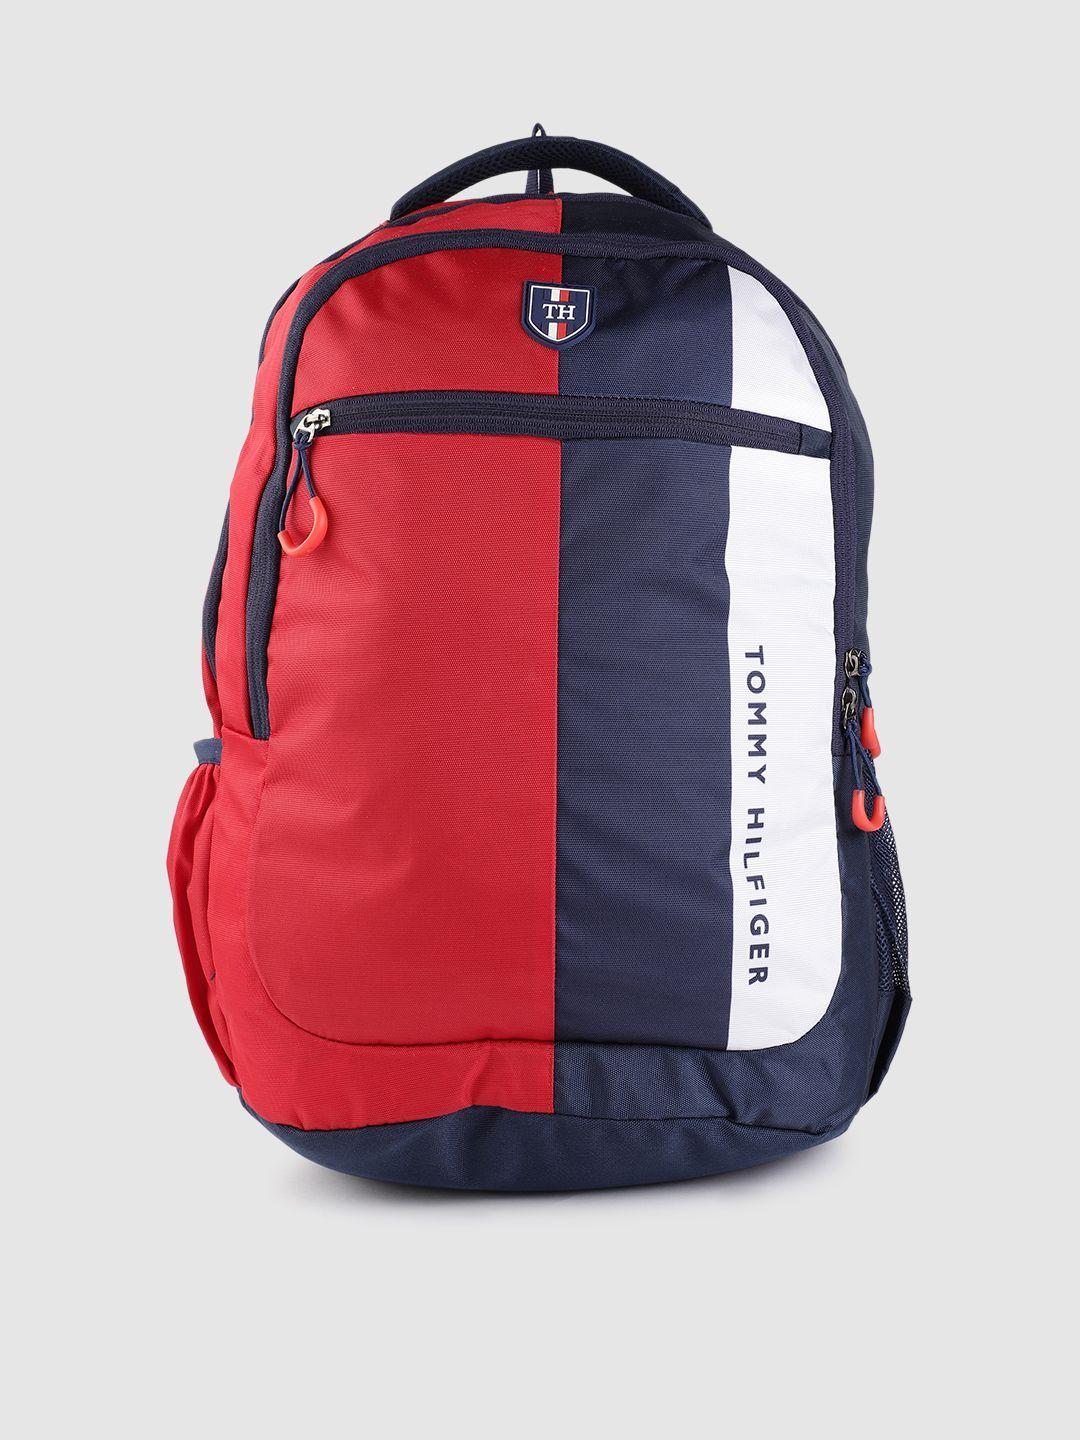 tommy hilfiger unisex red & navy blue colourblocked backpack